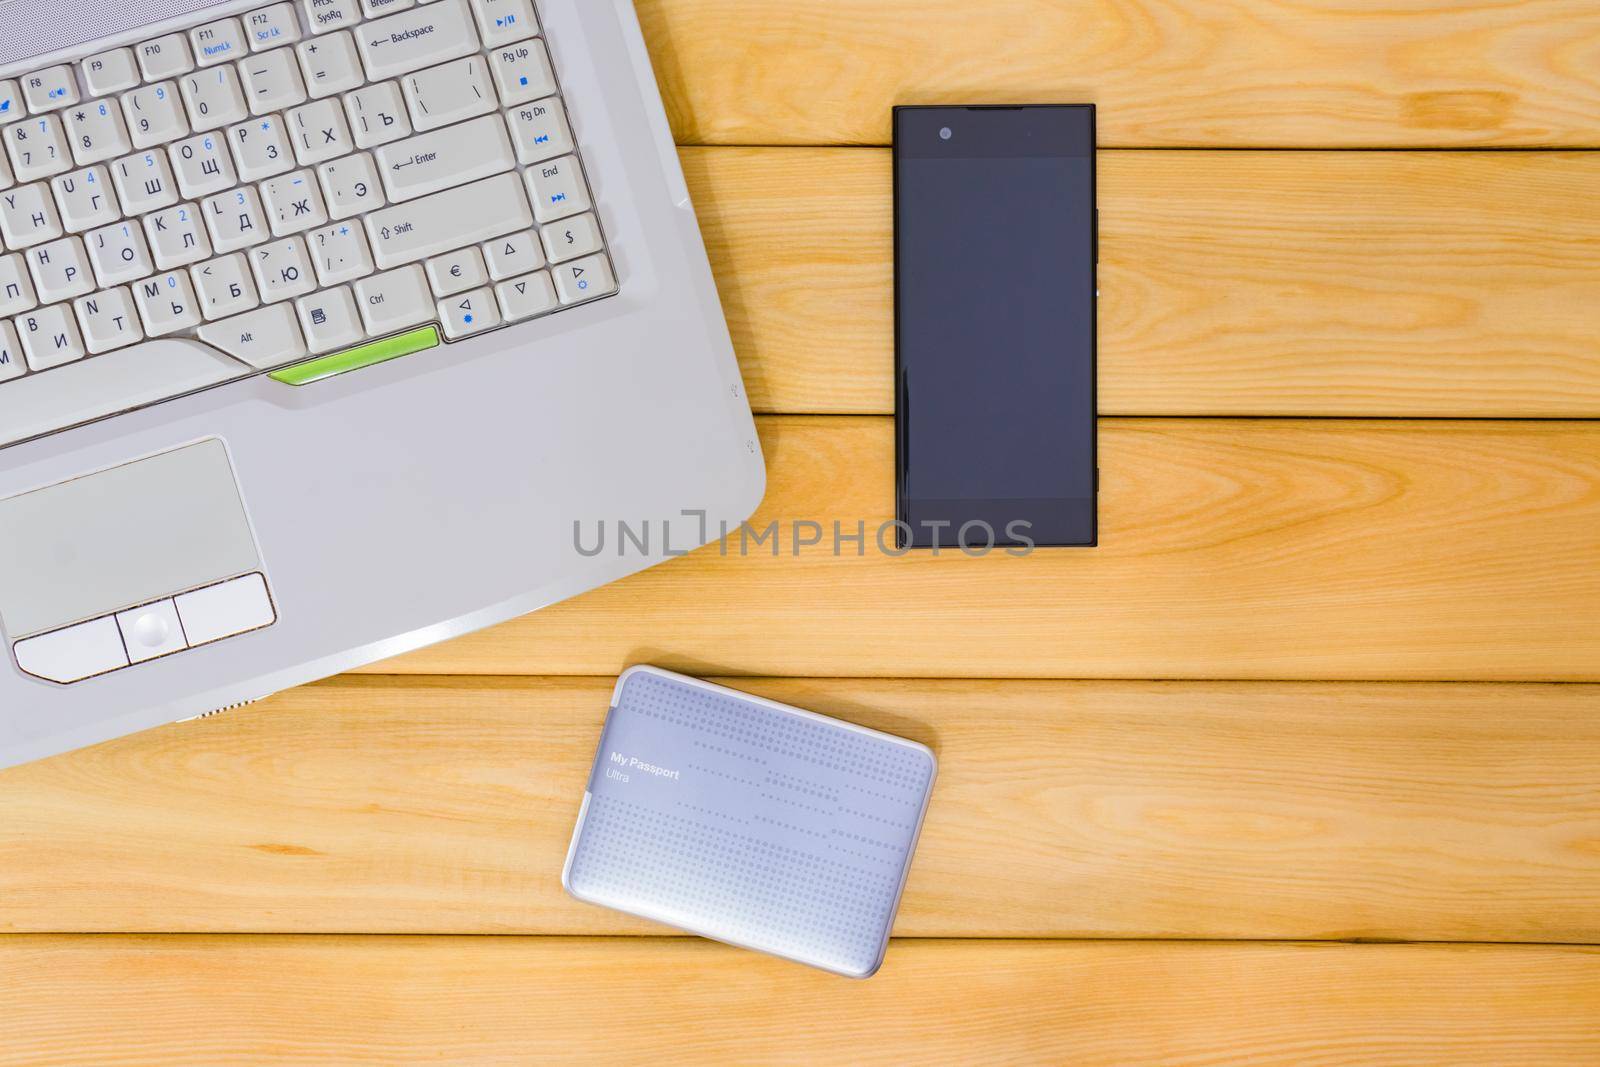 laptop on a wooden background top view. High quality photo